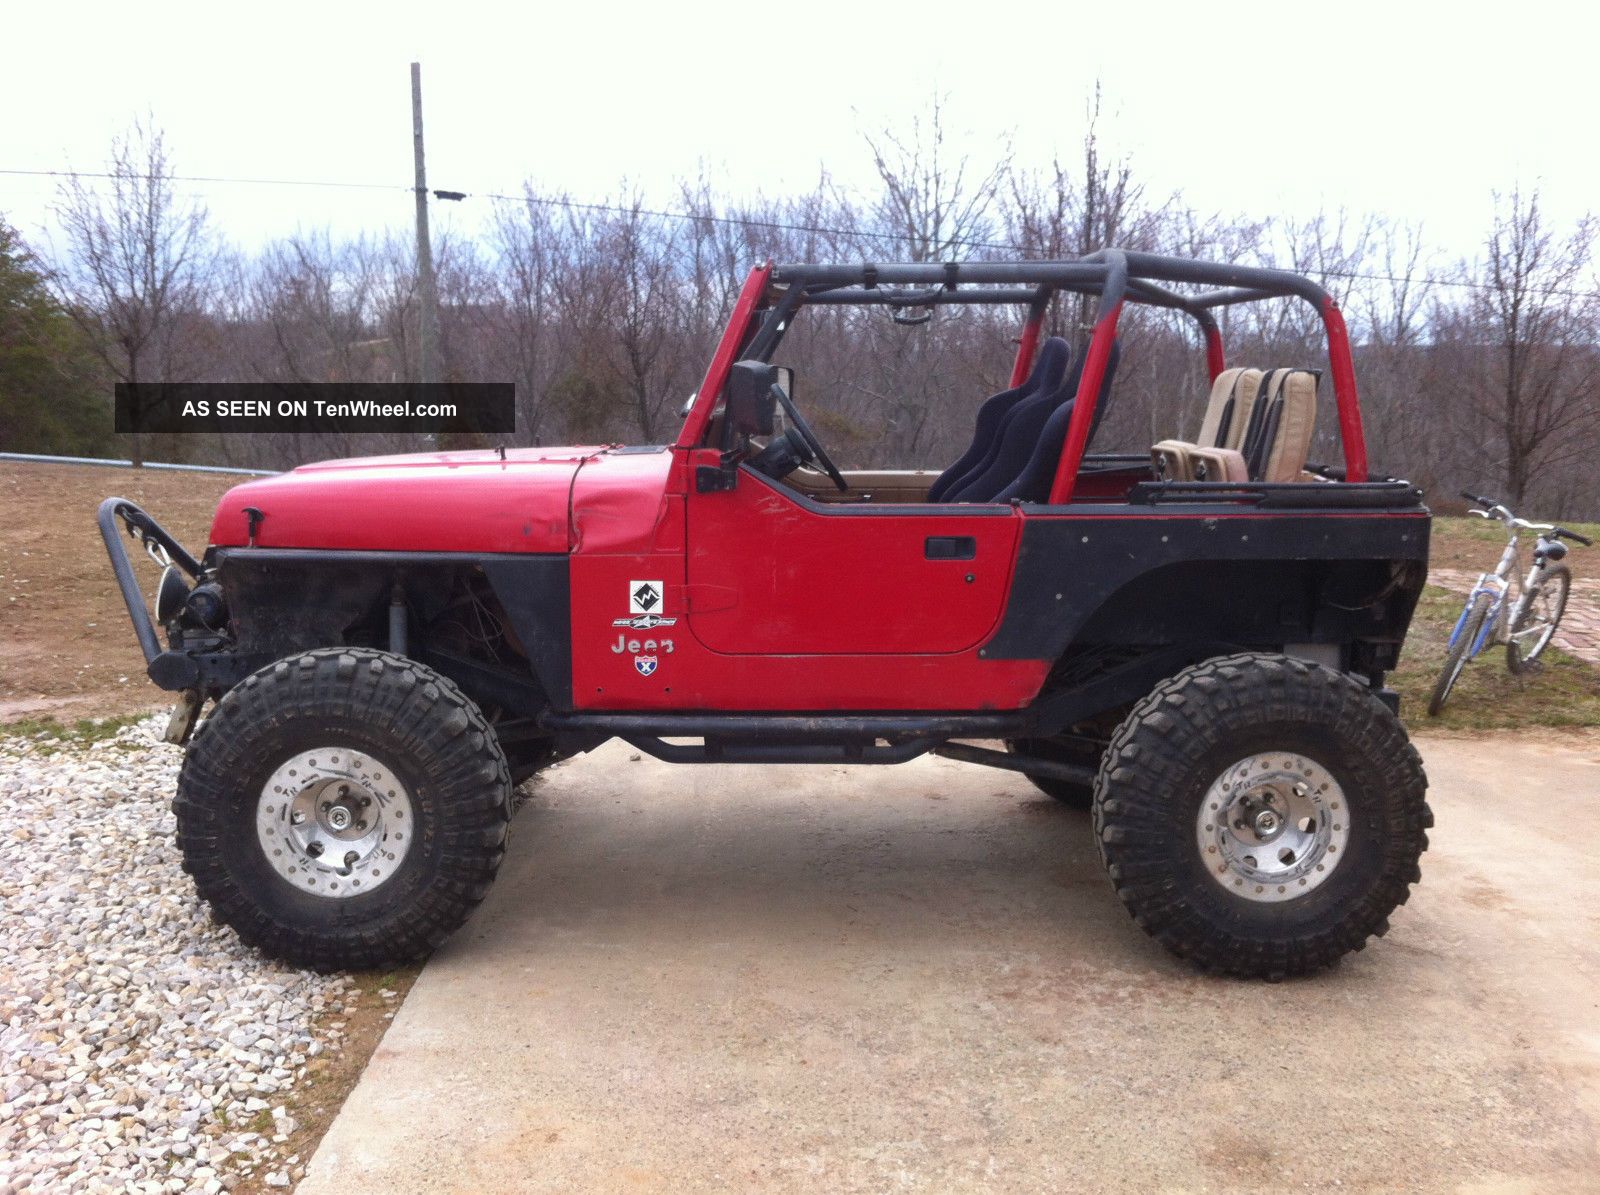 1994 Jeep wrangler yj owners manual #1